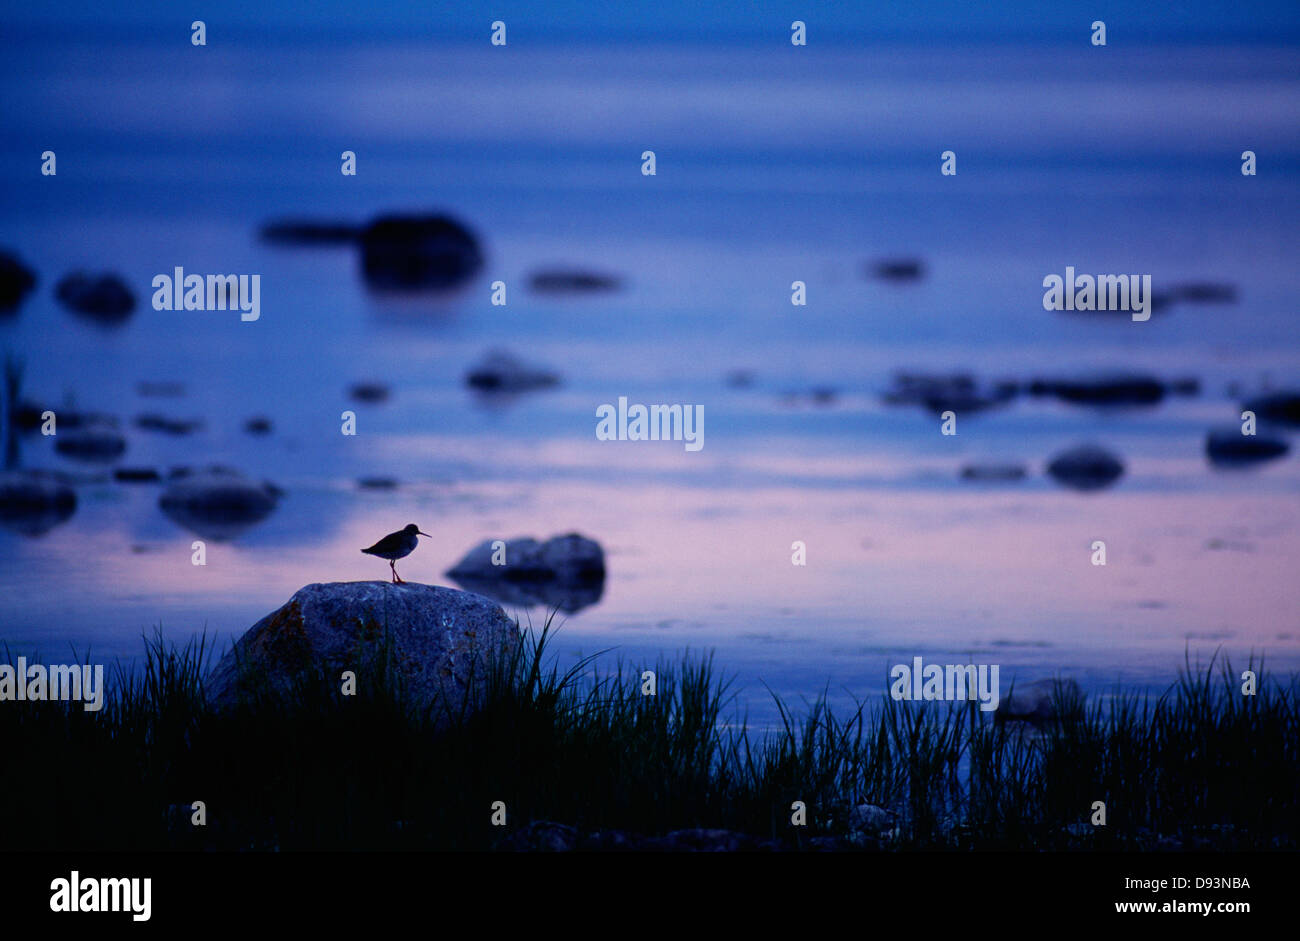 Silhouette of bird on stone by river, side view Stock Photo